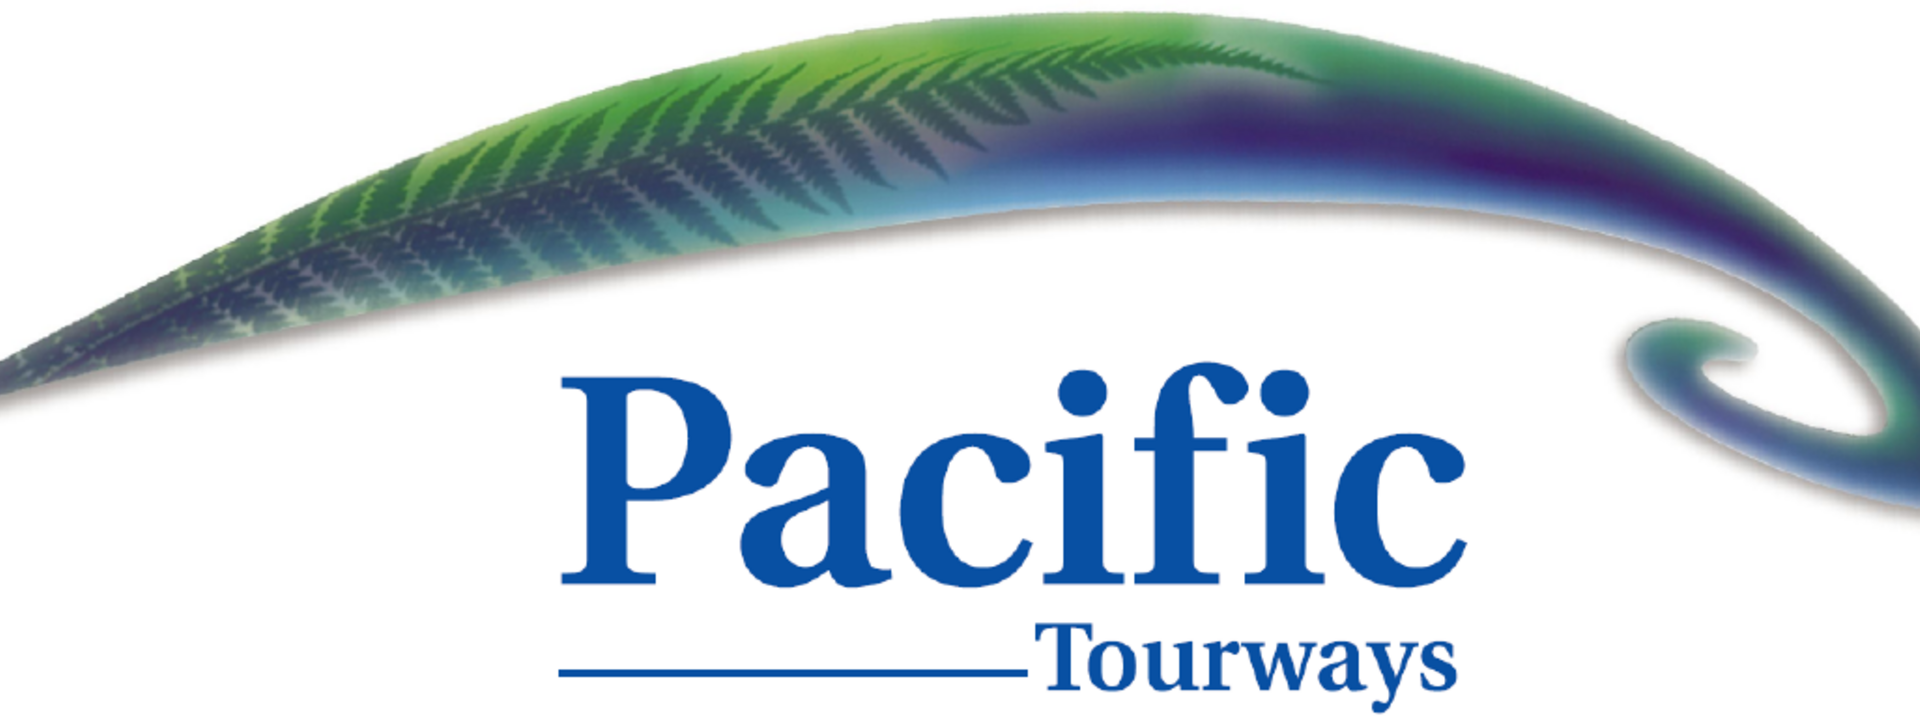 Pacific Tourways Logo Final - png.png